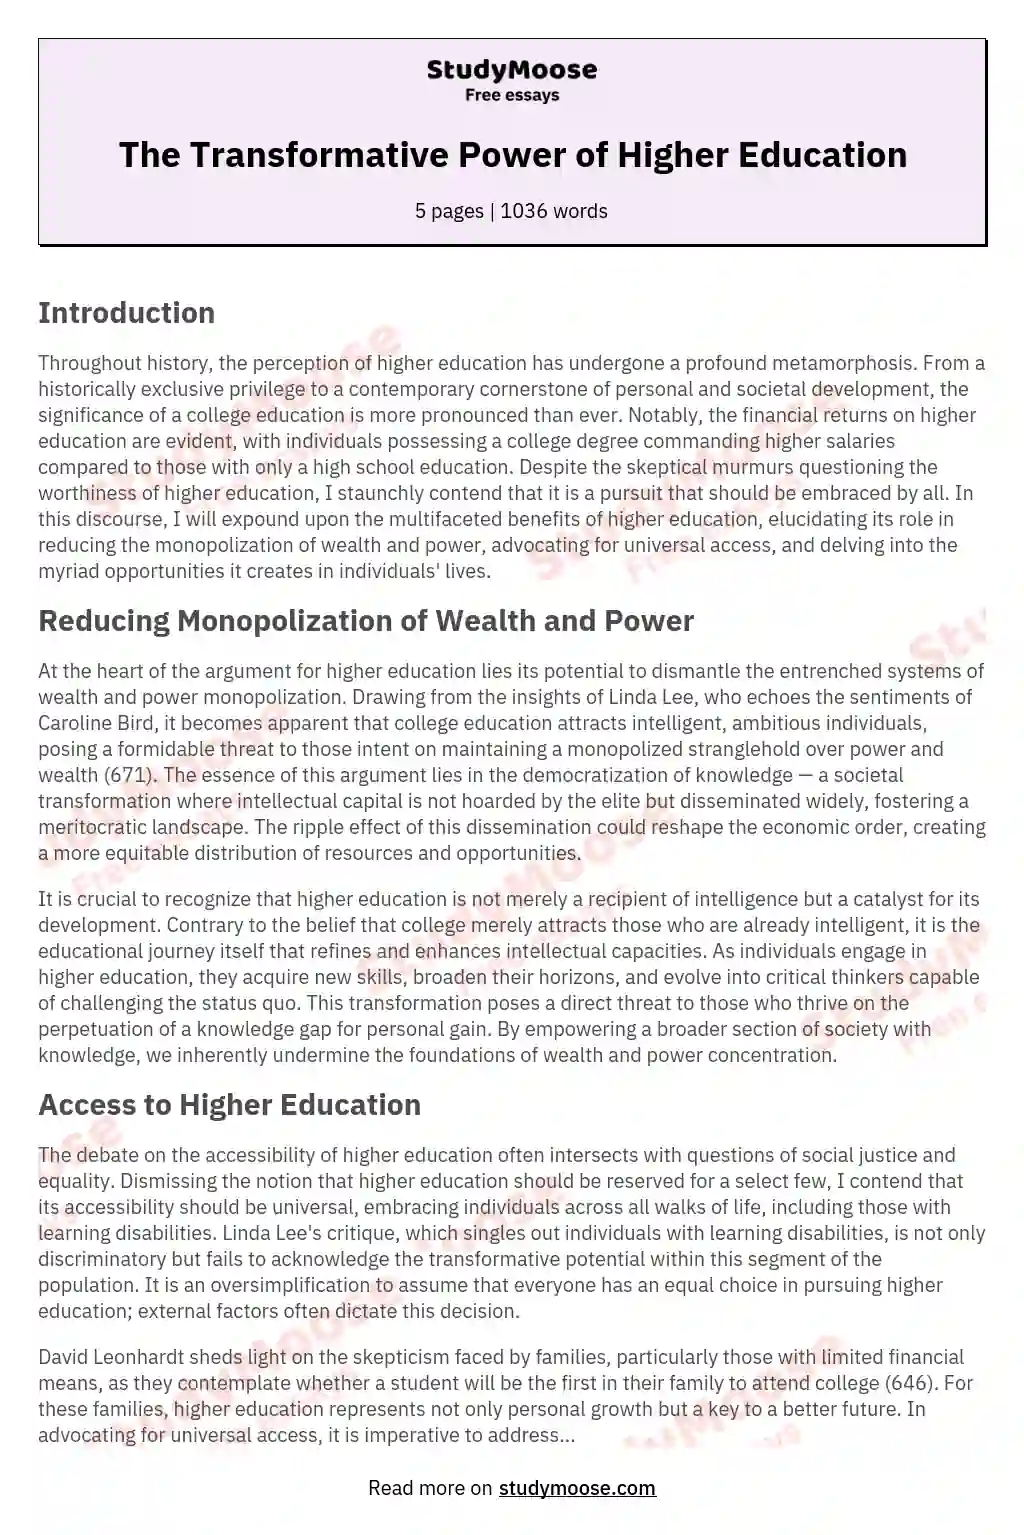 The Transformative Power of Higher Education essay